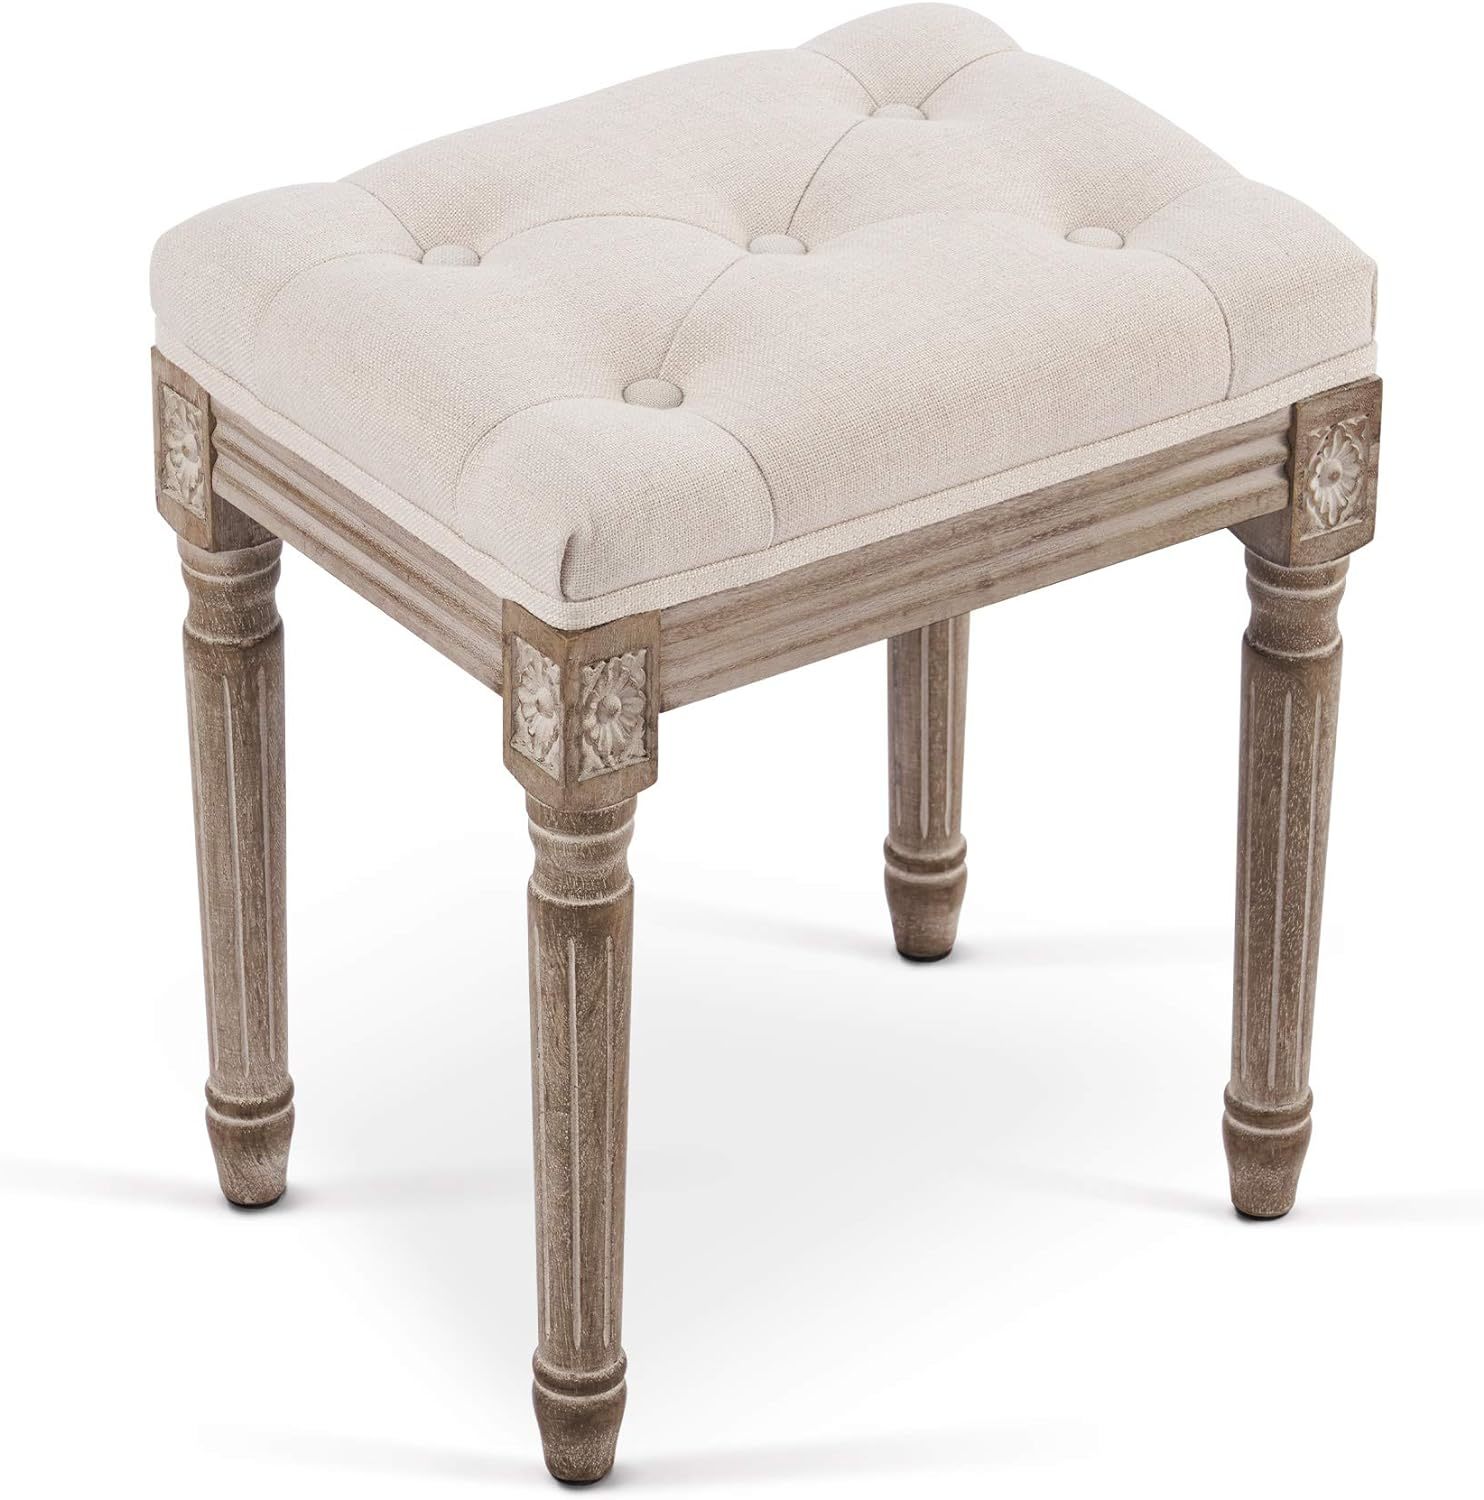 Primary image for Vonluce French Vintage Foot Stool With Wooden Legs And Padded Seat,, Beige.